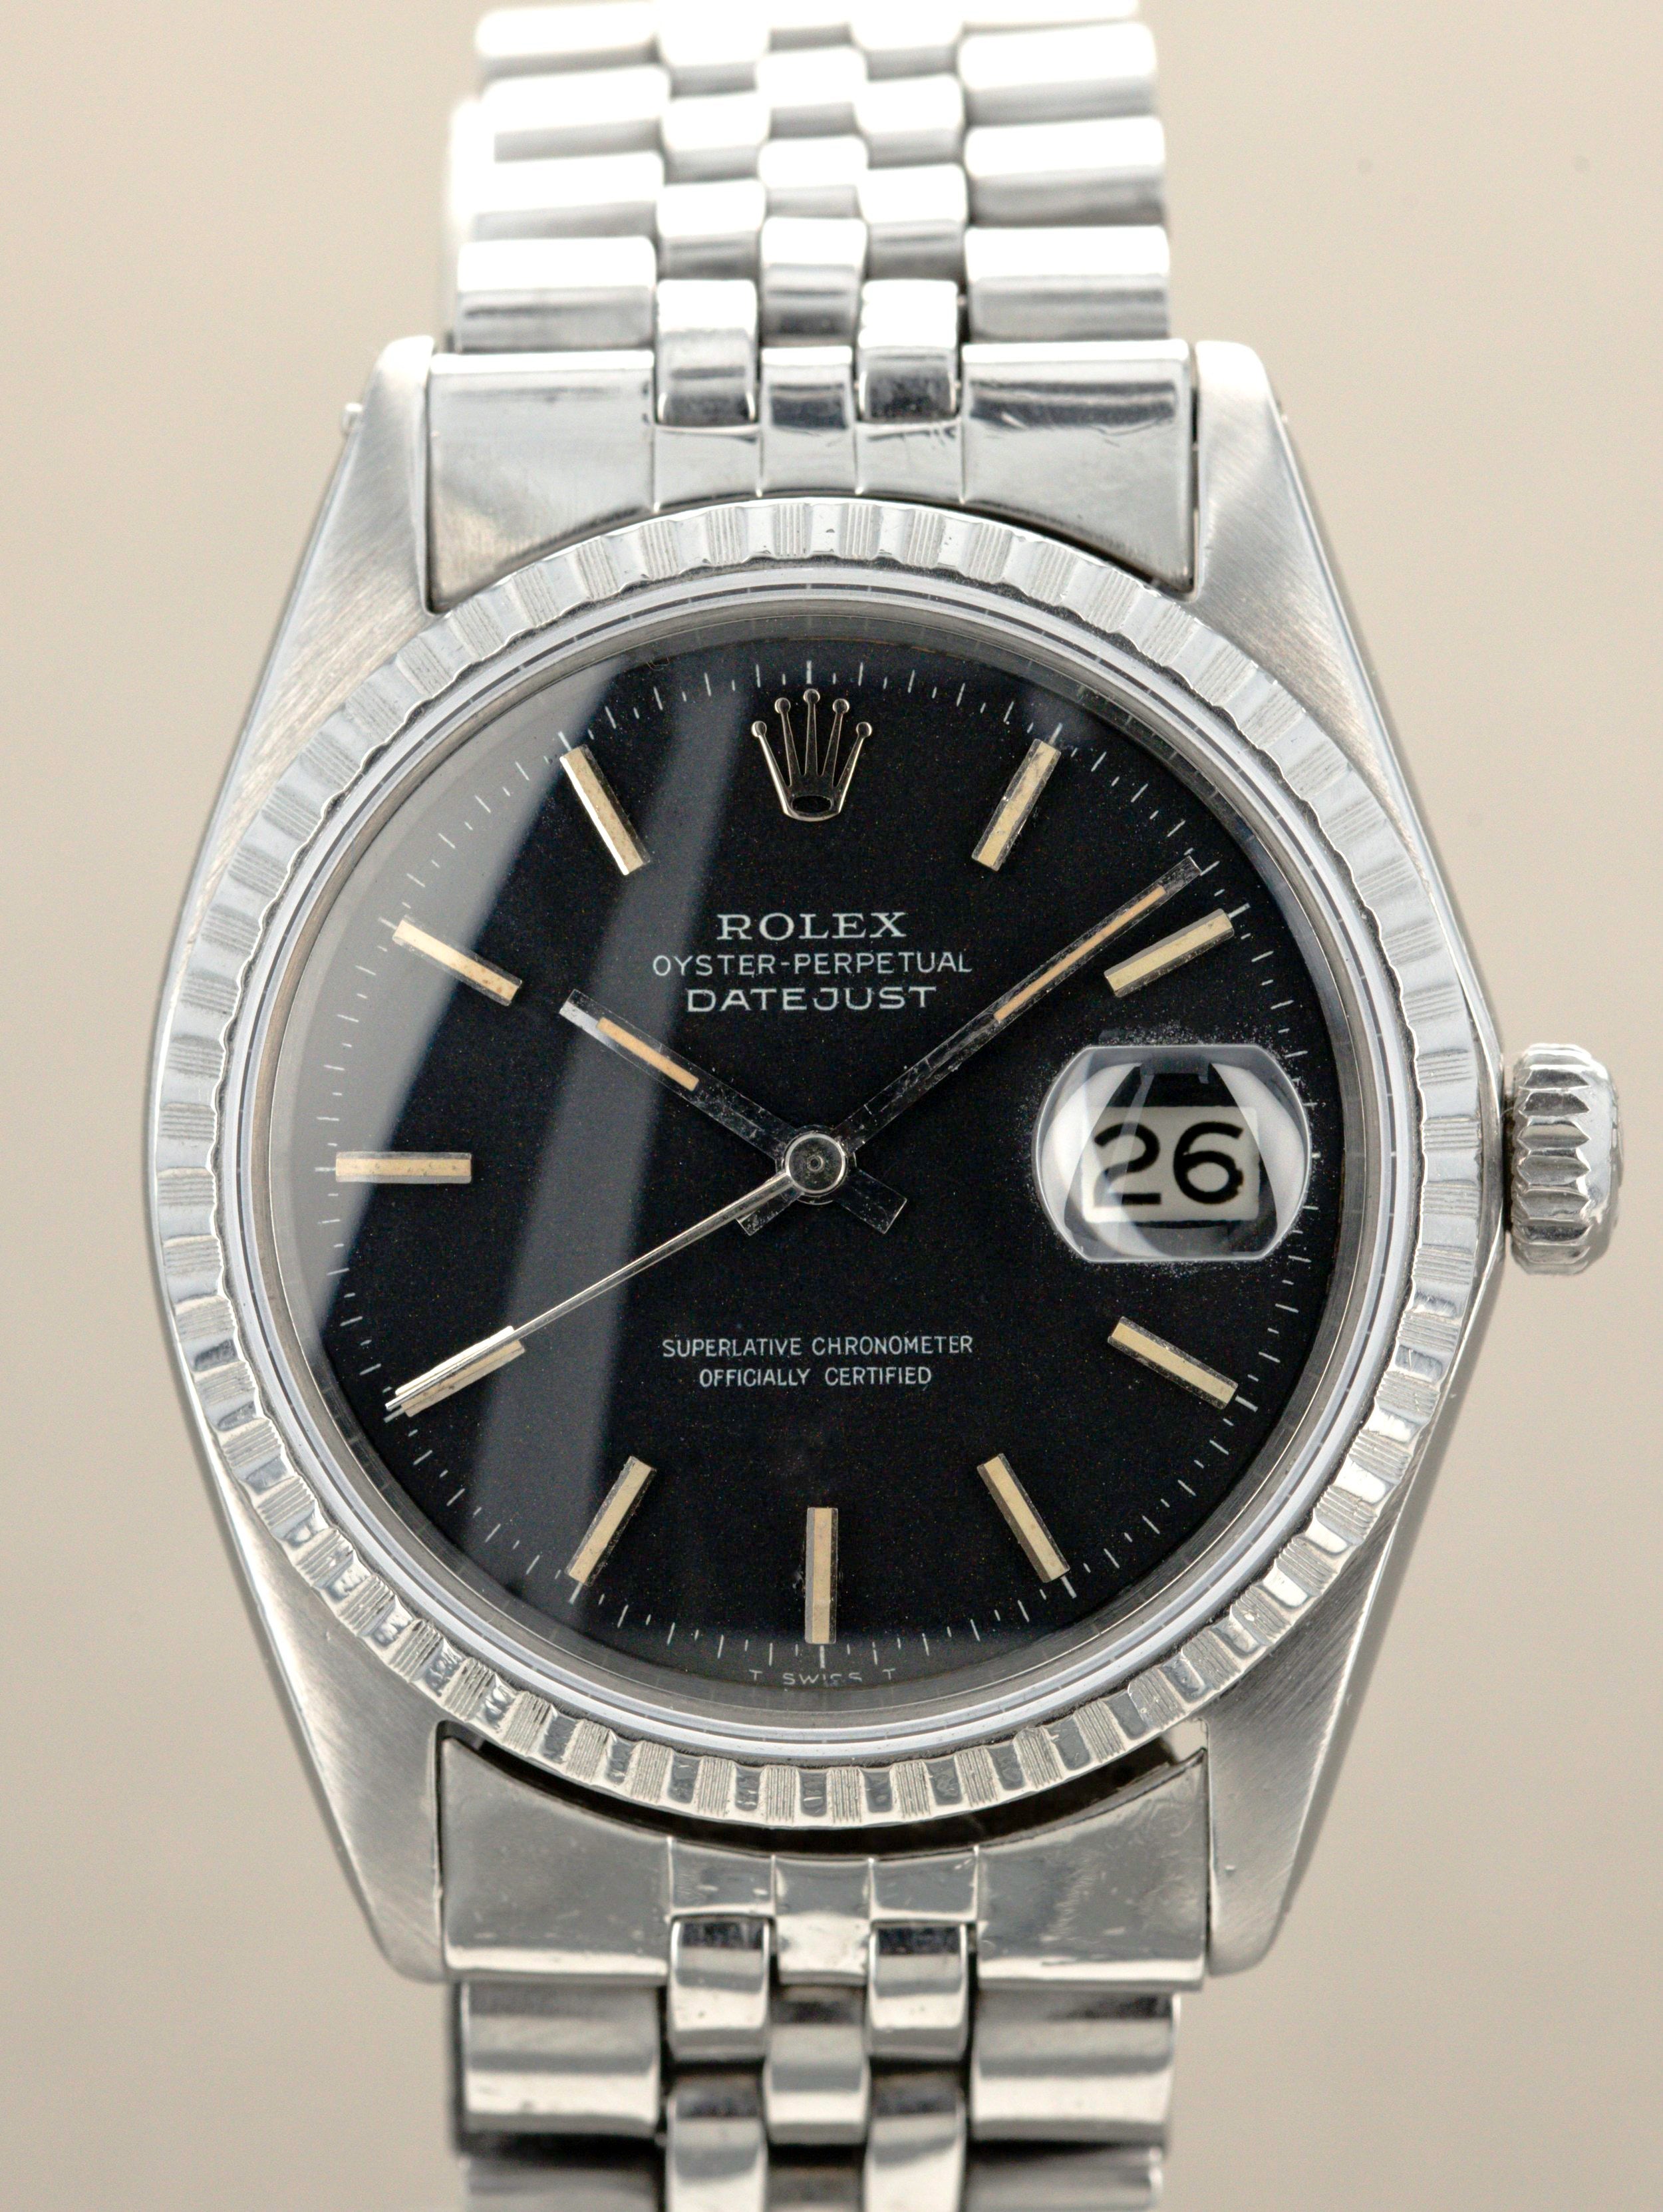 Rolex Datejust Ref. 1603 - Confetti Dial with papers